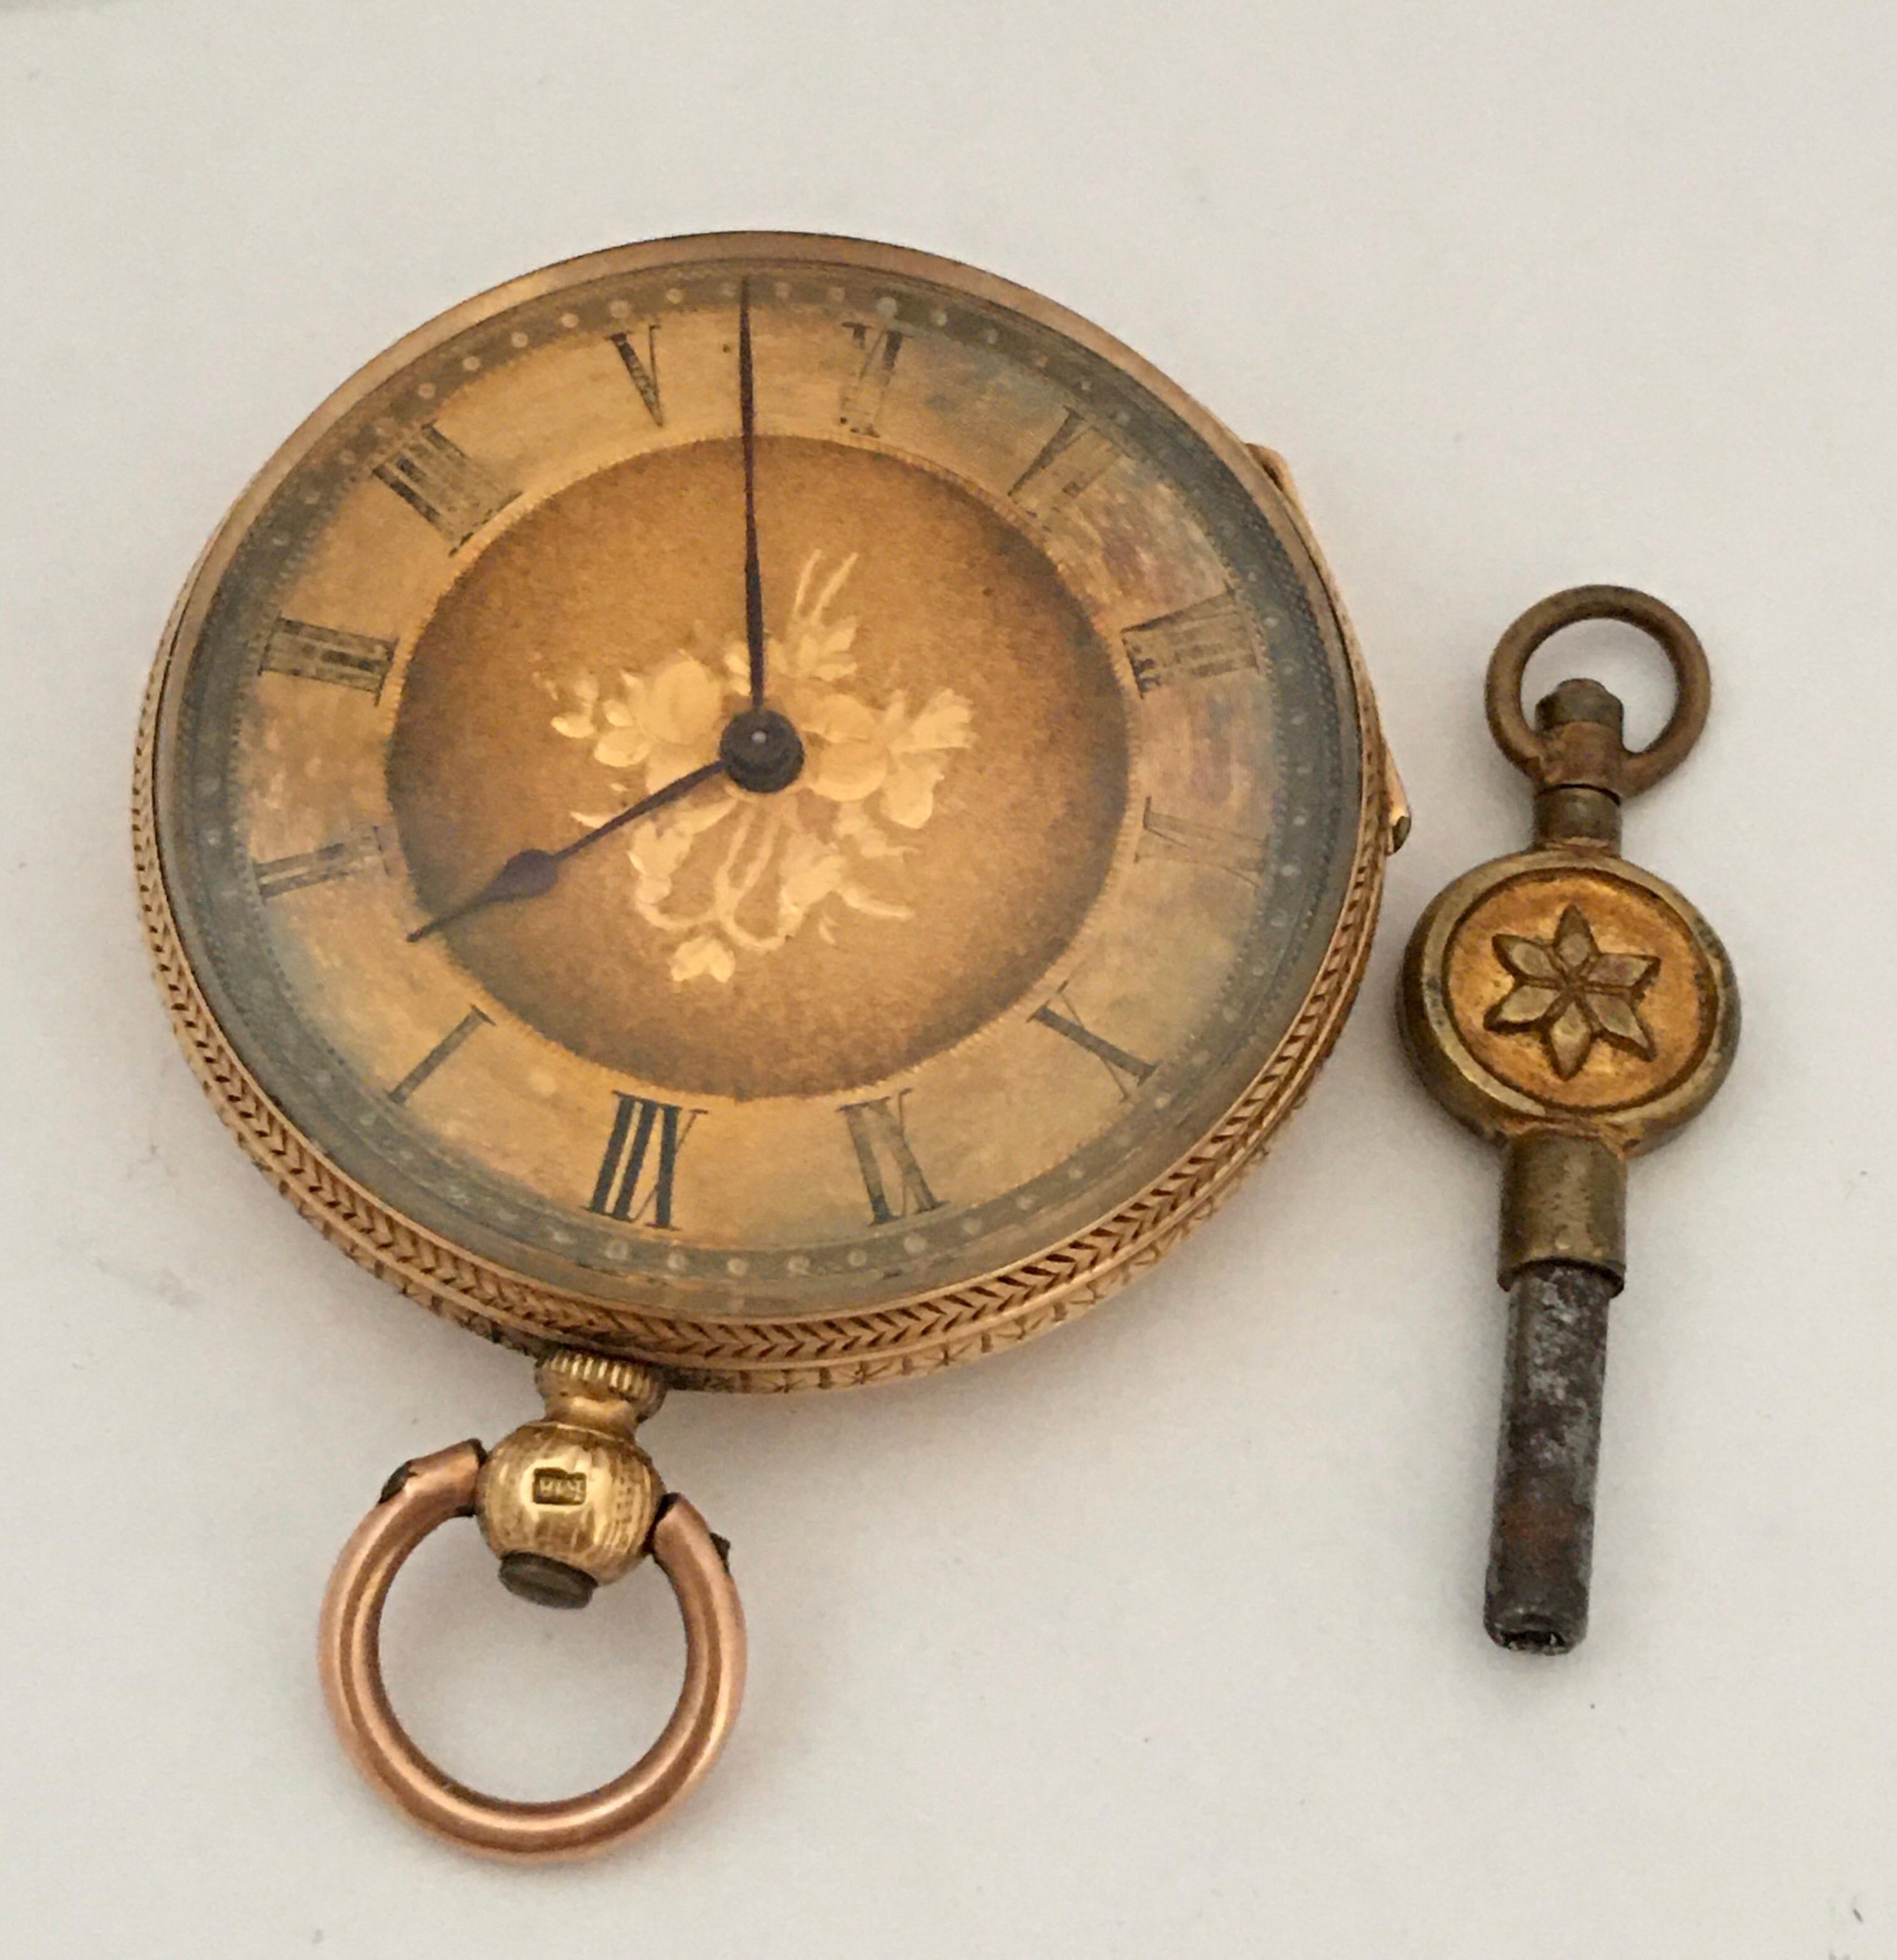 This beautiful antique key-wind Gold Pocket Watch is in good working condition and it is ticking well. It comes with a key. The dial is a bit tired and has aged. The metal ring or Loop is different gold colour to the watch case. Watch size